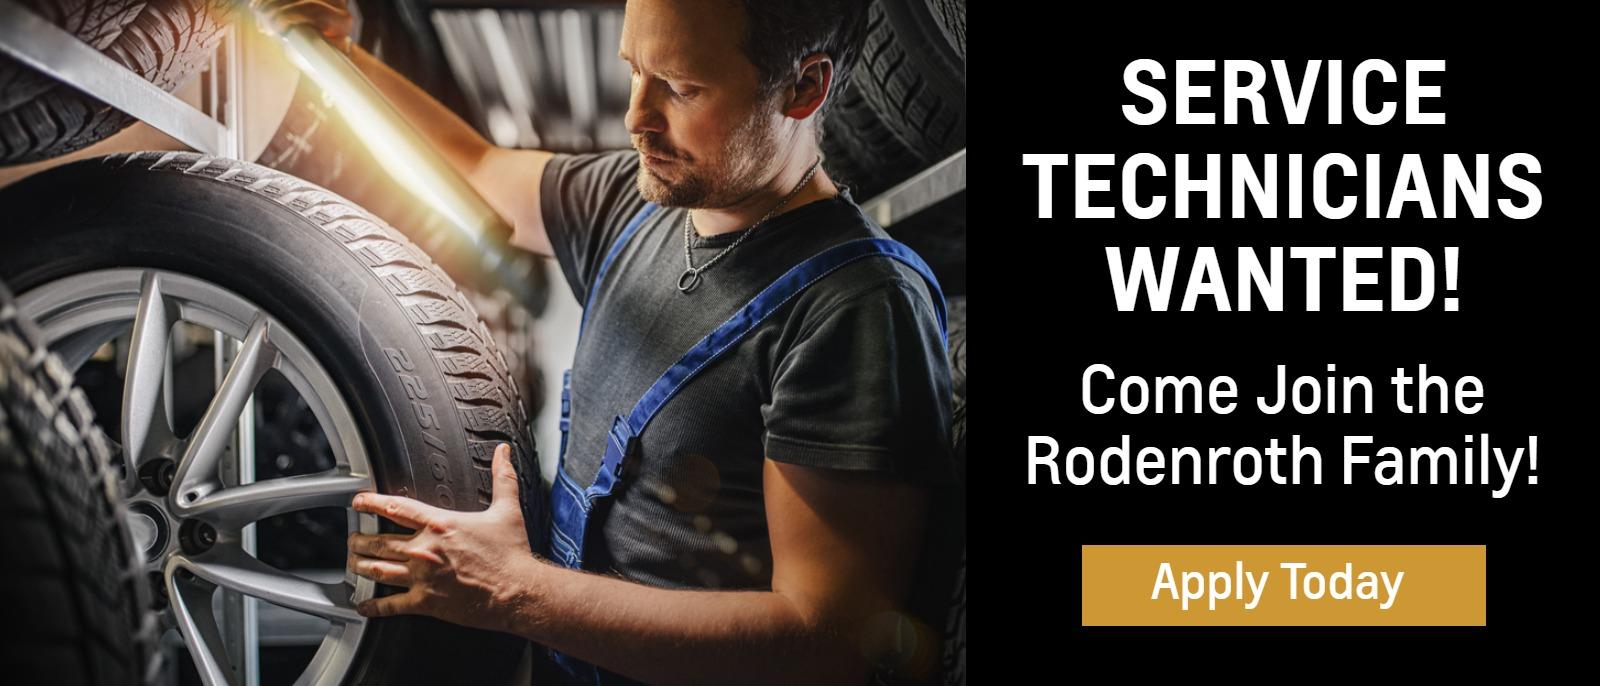 Service Technicians Wanted! Come Join the Rodenroth Family!